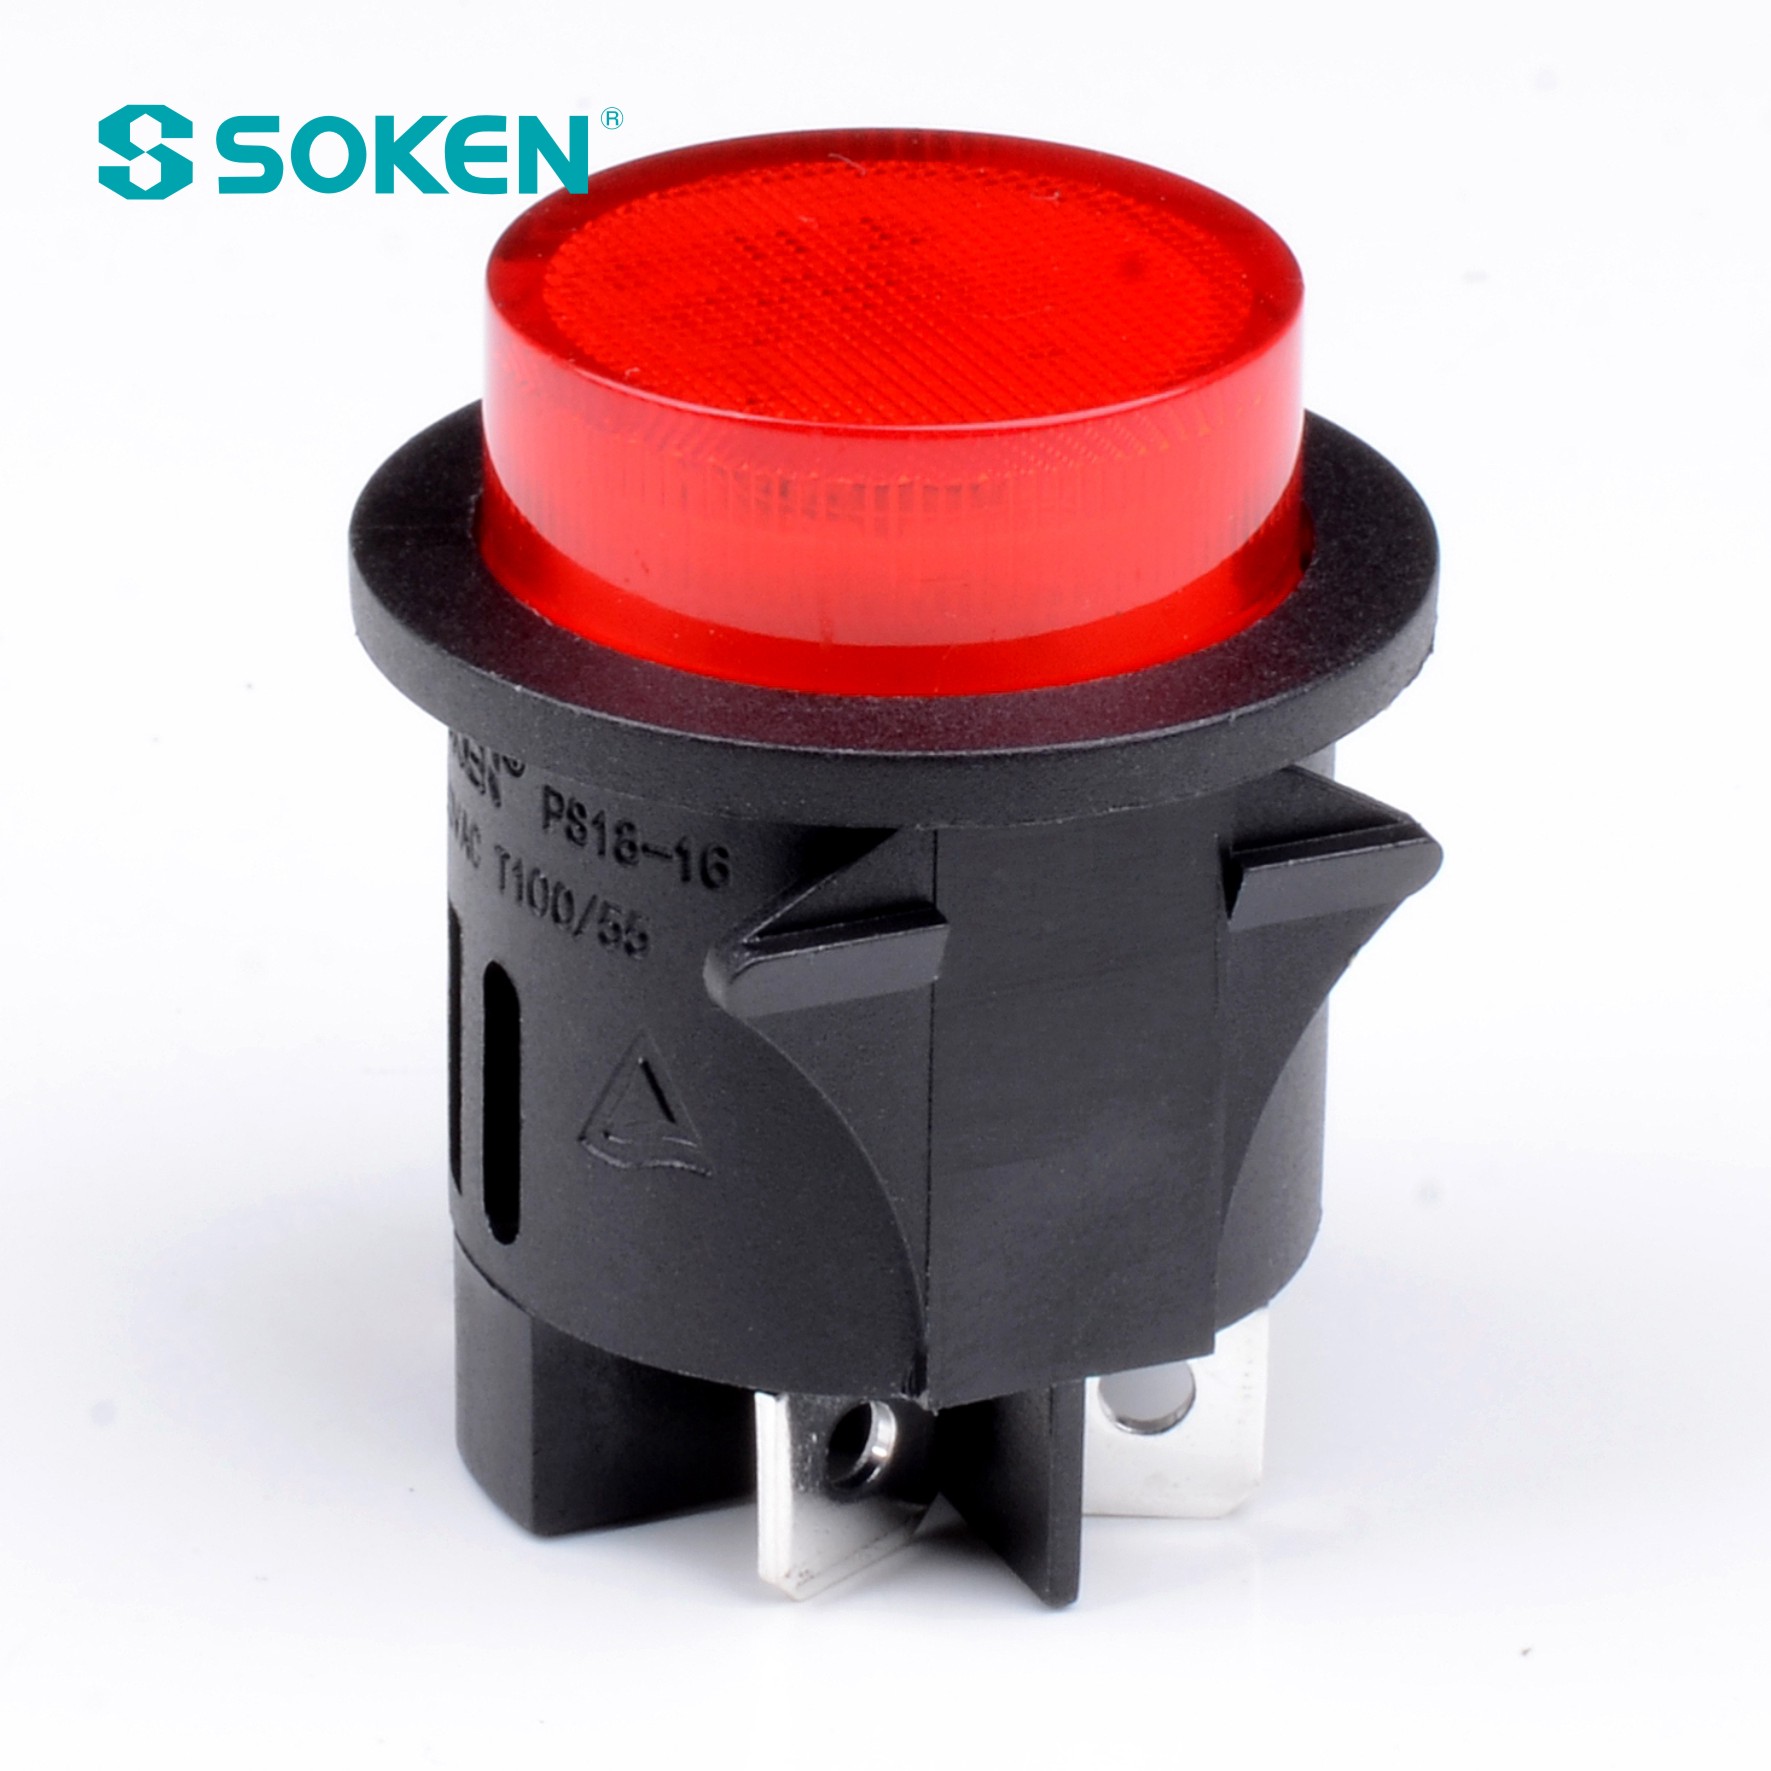 LED Push Button Switch in Red, Green, Orange